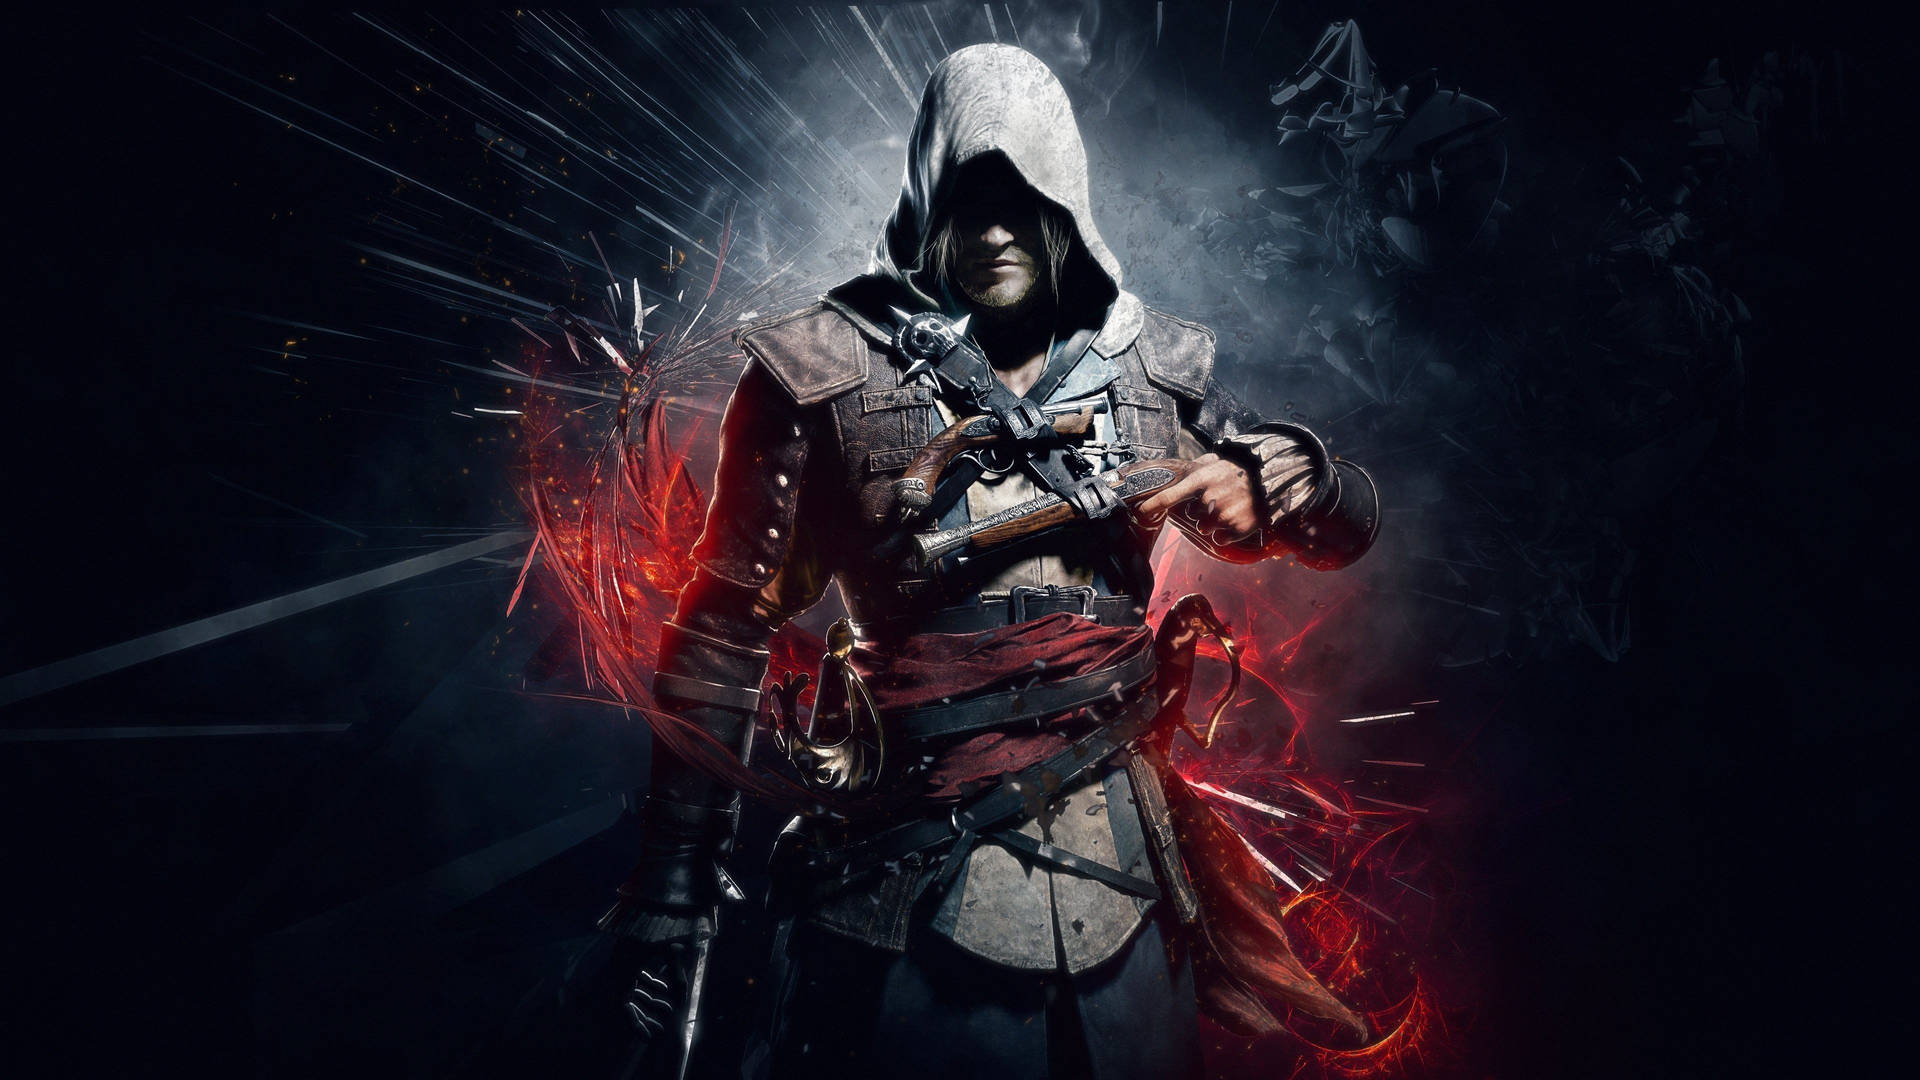 HD Assassin's Creed spilcover Wallpaper